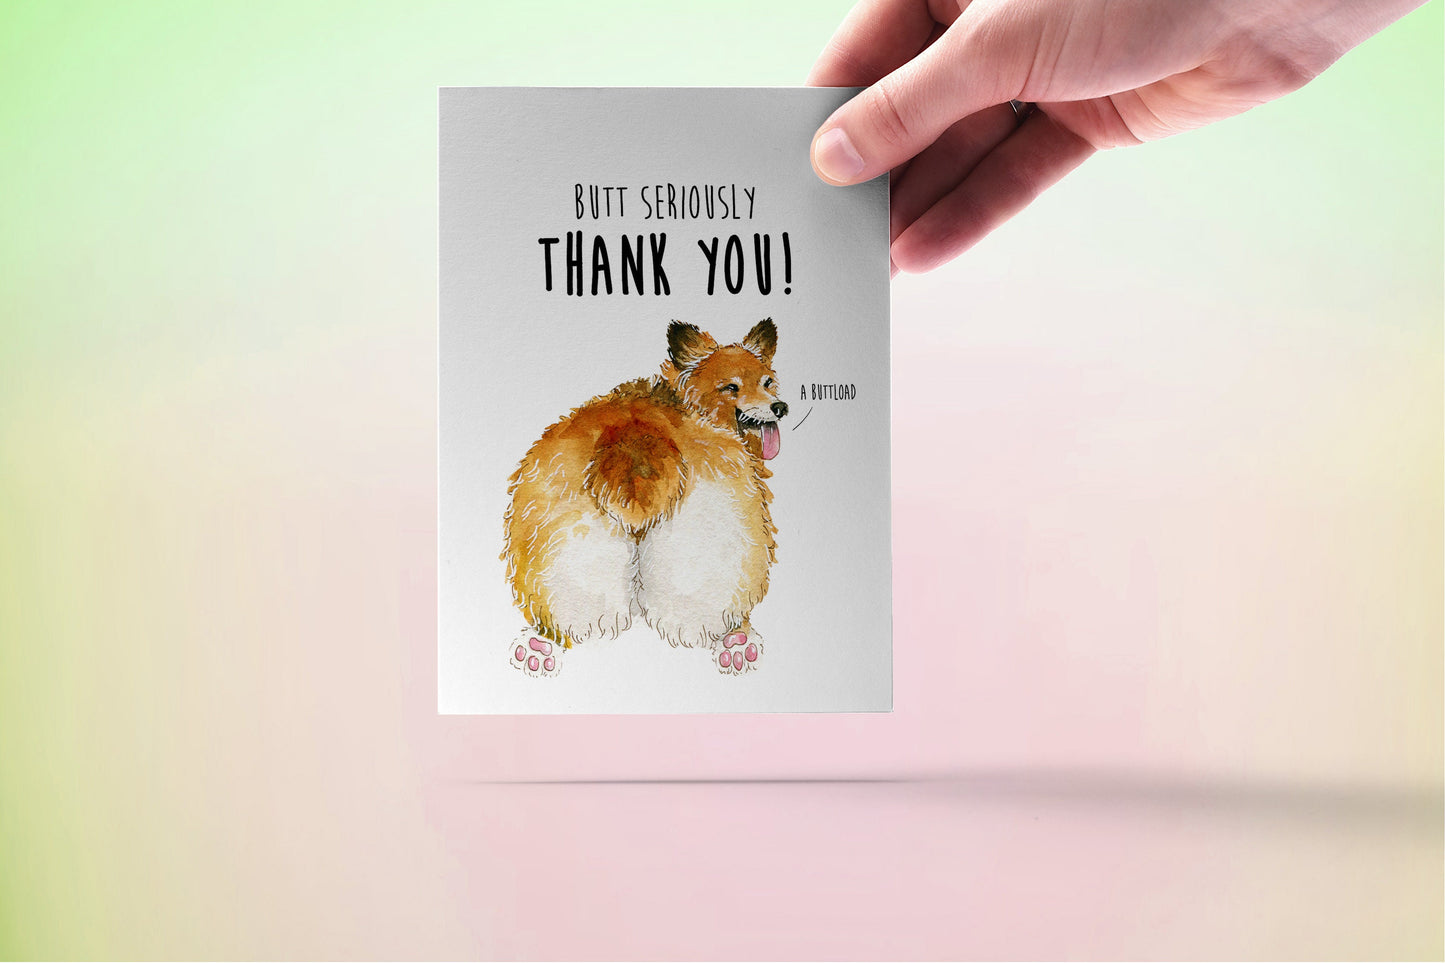 Corgi Butt Thank You Cards For Friend - Butt Seriously Thank You A Buttload - Appreciation Gift From Dog